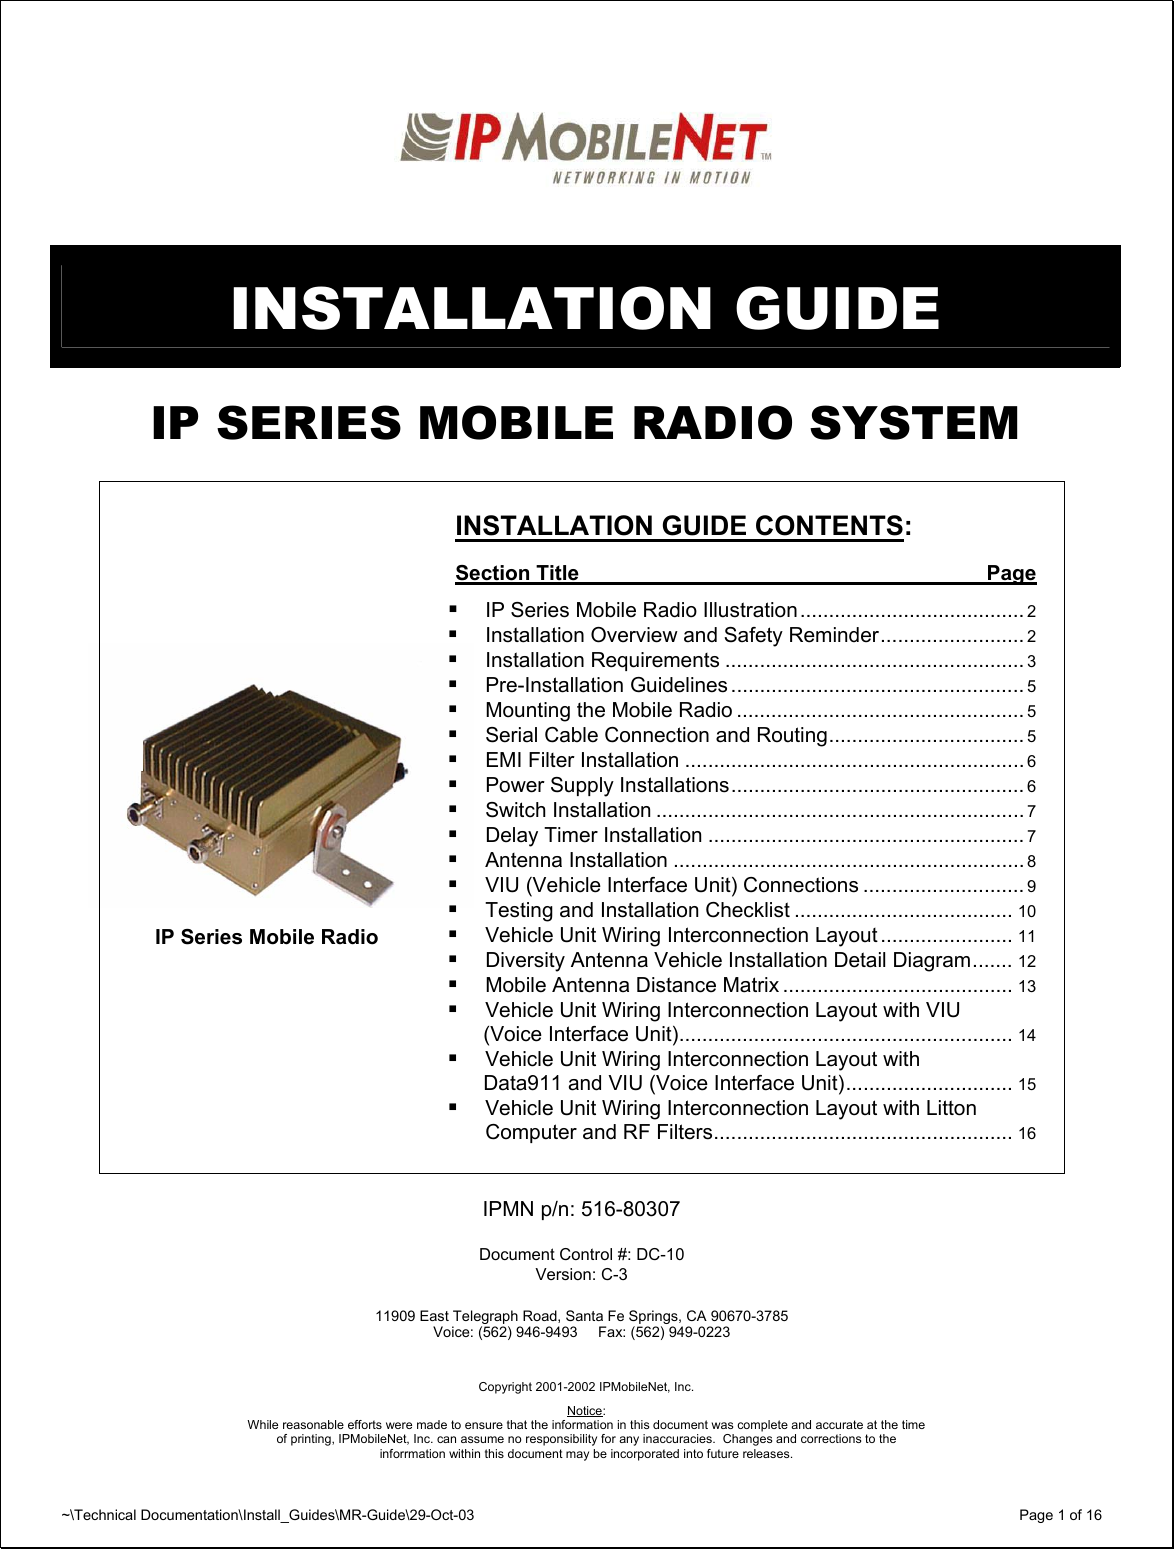 ~\Technical Documentation\Install_Guides\MR-Guide\29-Oct-03   Page 1 of 16    INSTALLATION GUIDE  IP SERIES MOBILE RADIO SYSTEM      INSTALLATION GUIDE CONTENTS:  Section Title  Page   IP Series Mobile Radio Illustration....................................... 2  Installation Overview and Safety Reminder......................... 2  Installation Requirements .................................................... 3  Pre-Installation Guidelines ................................................... 5  Mounting the Mobile Radio .................................................. 5  Serial Cable Connection and Routing.................................. 5  EMI Filter Installation ........................................................... 6  Power Supply Installations................................................... 6  Switch Installation ................................................................ 7  Delay Timer Installation ....................................................... 7  Antenna Installation ............................................................. 8  VIU (Vehicle Interface Unit) Connections ............................ 9  Testing and Installation Checklist ...................................... 10  Vehicle Unit Wiring Interconnection Layout ....................... 11  Diversity Antenna Vehicle Installation Detail Diagram....... 12  Mobile Antenna Distance Matrix ........................................ 13  Vehicle Unit Wiring Interconnection Layout with VIU   (Voice Interface Unit).......................................................... 14  Vehicle Unit Wiring Interconnection Layout with   Data911 and VIU (Voice Interface Unit)............................. 15  Vehicle Unit Wiring Interconnection Layout with Litton Computer and RF Filters.................................................... 16   IPMN p/n: 516-80307  Document Control #: DC-10 Version: C-3  11909 East Telegraph Road, Santa Fe Springs, CA 90670-3785 Voice: (562) 946-9493     Fax: (562) 949-0223     Copyright 2001-2002 IPMobileNet, Inc.  Notice:  While reasonable efforts were made to ensure that the information in this document was complete and accurate at the time of printing, IPMobileNet, Inc. can assume no responsibility for any inaccuracies.  Changes and corrections to the  inforrmation within this document may be incorporated into future releases.IP Series Mobile Radio 